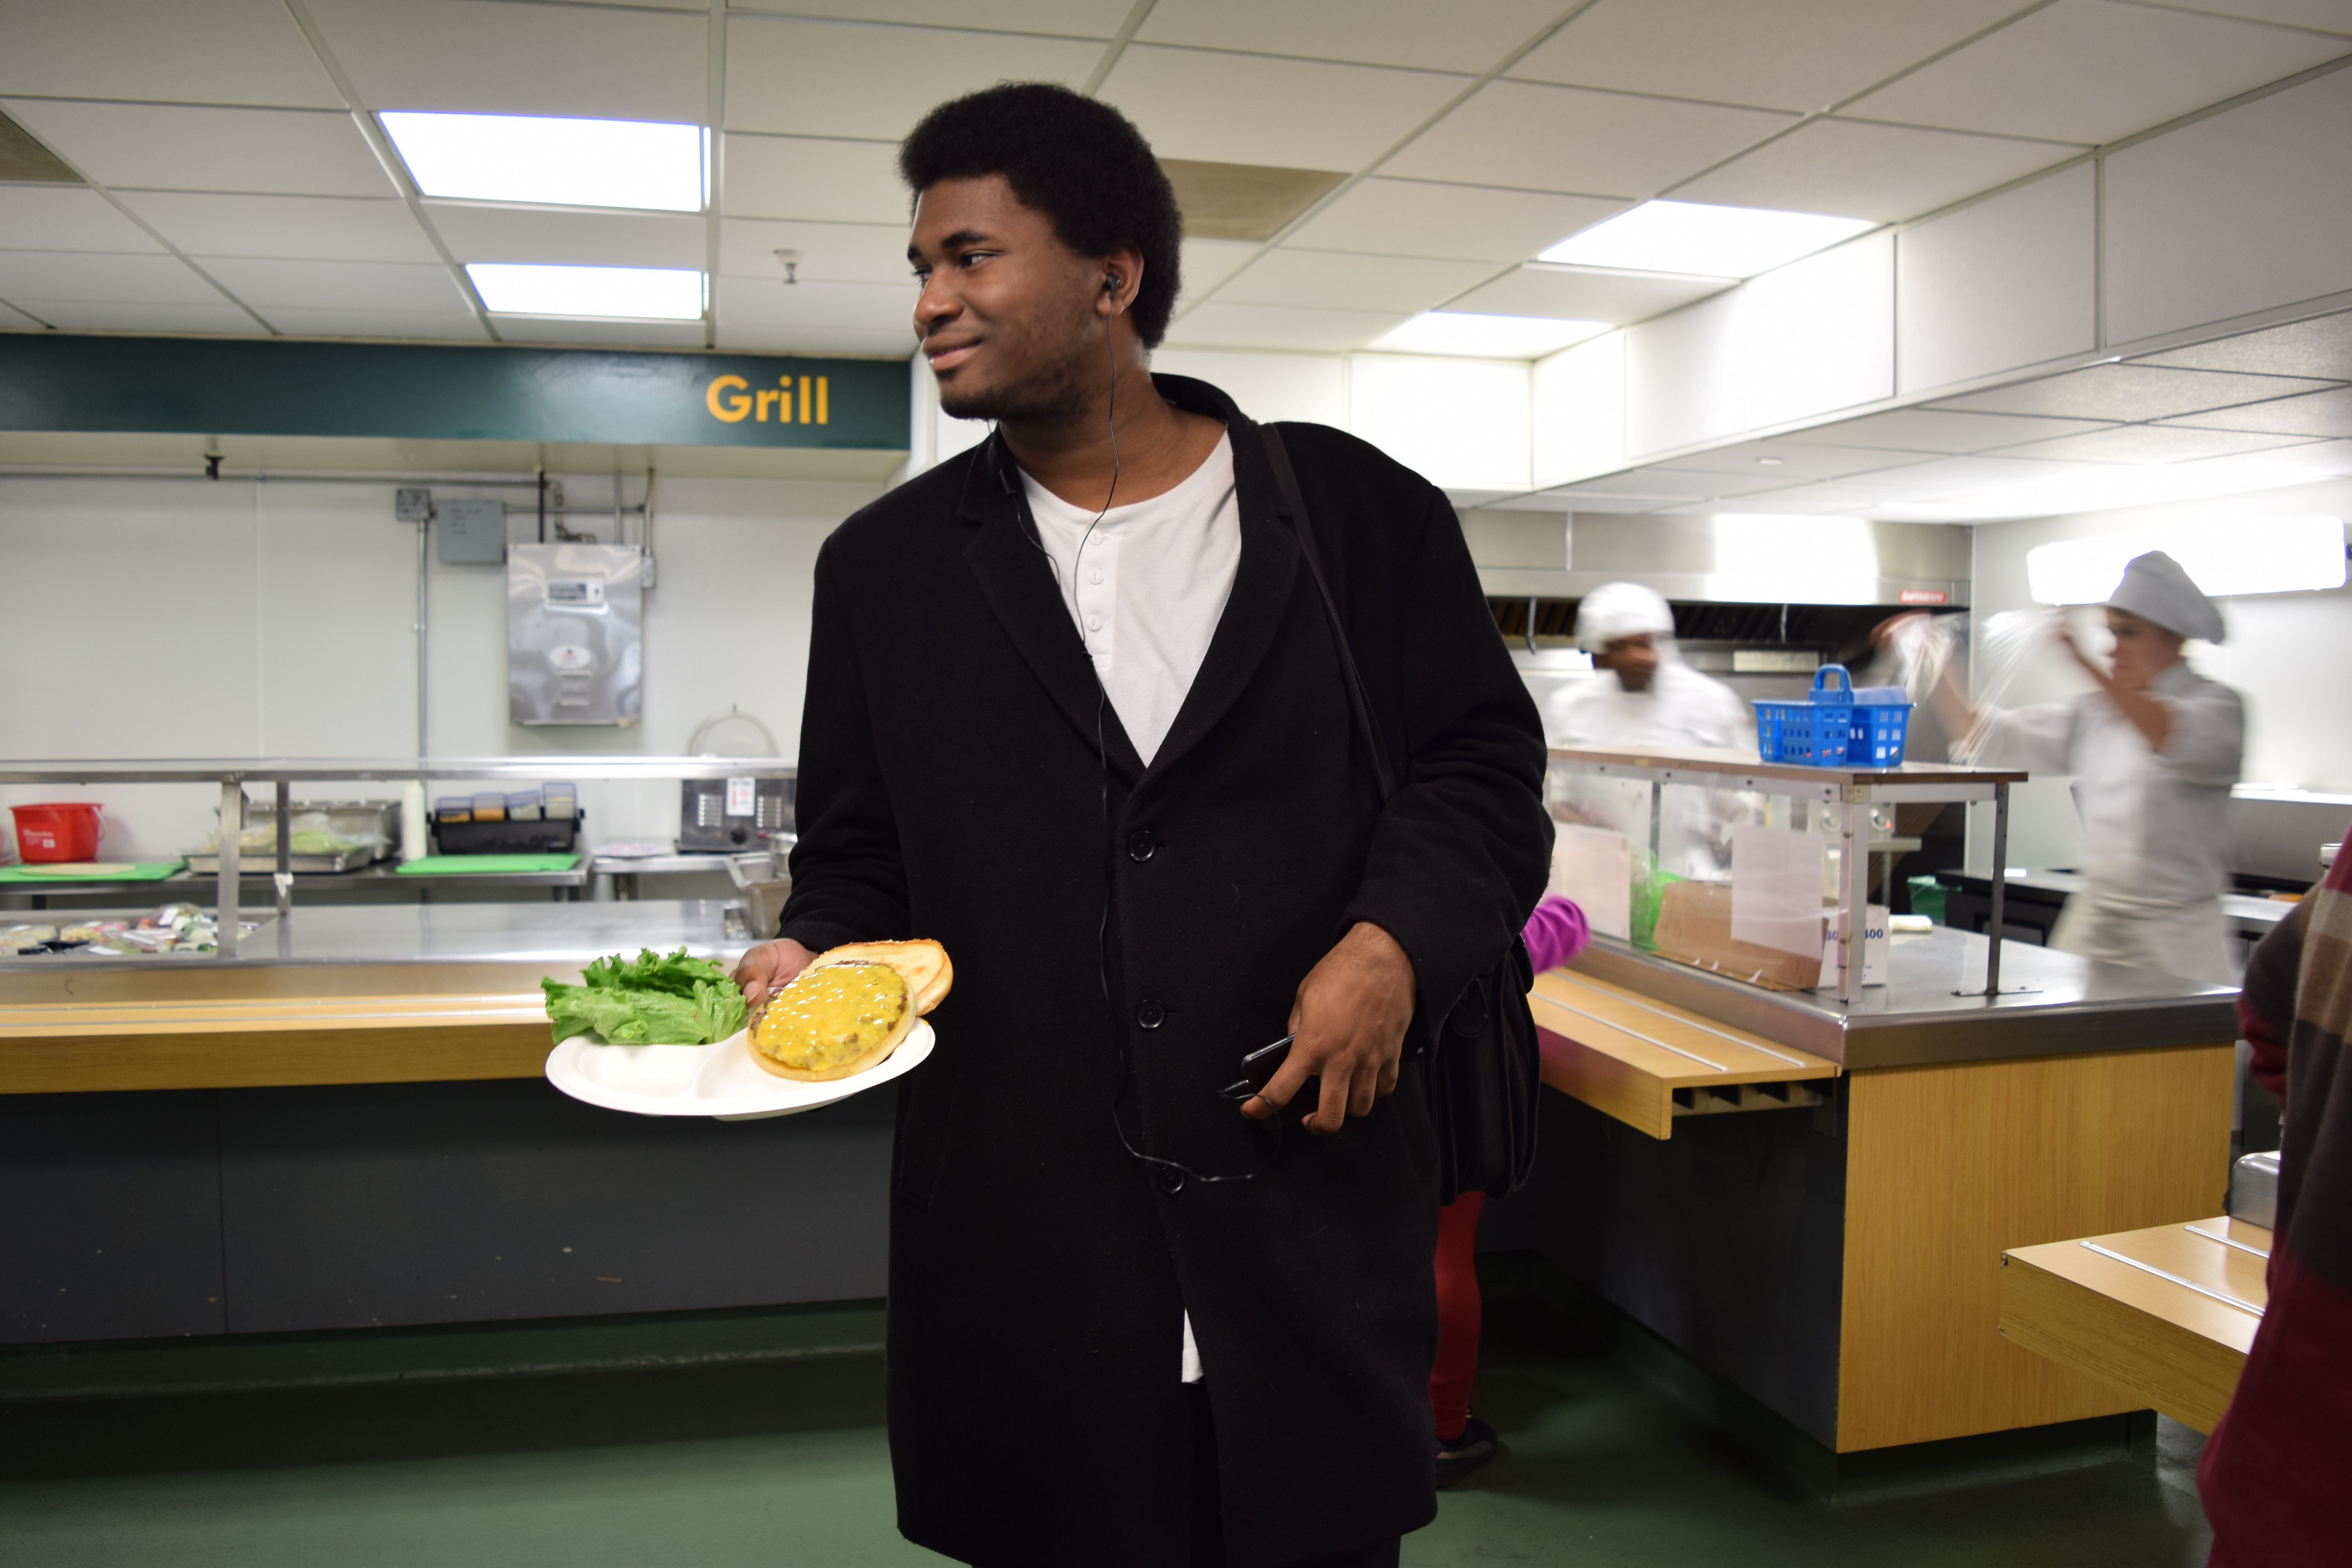 Student Darren Owen, a computer science major, seems ready to enjoy his Laney College main cafeteria grilled burger on Nov 29, 2017. (Photo by Barbara Muniz)